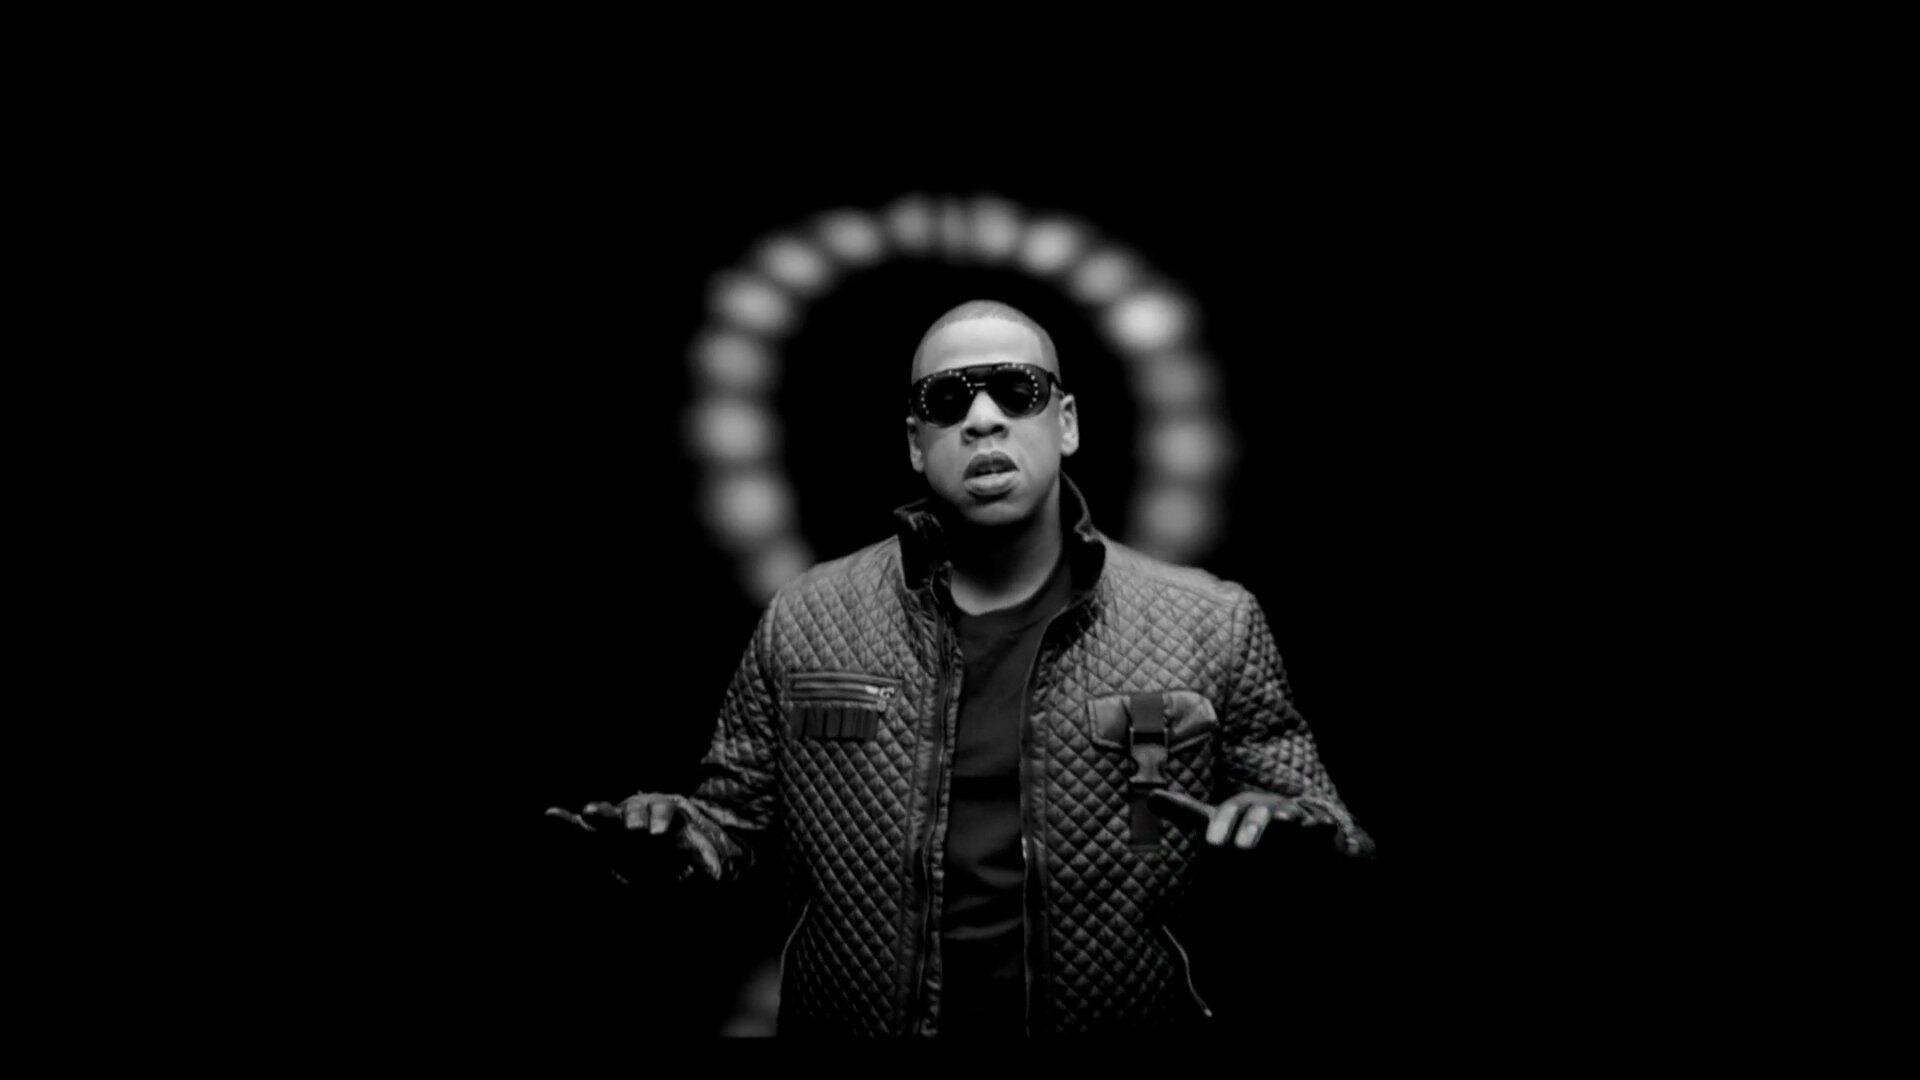 jay-z-wallpapers-37282-6877204.png.